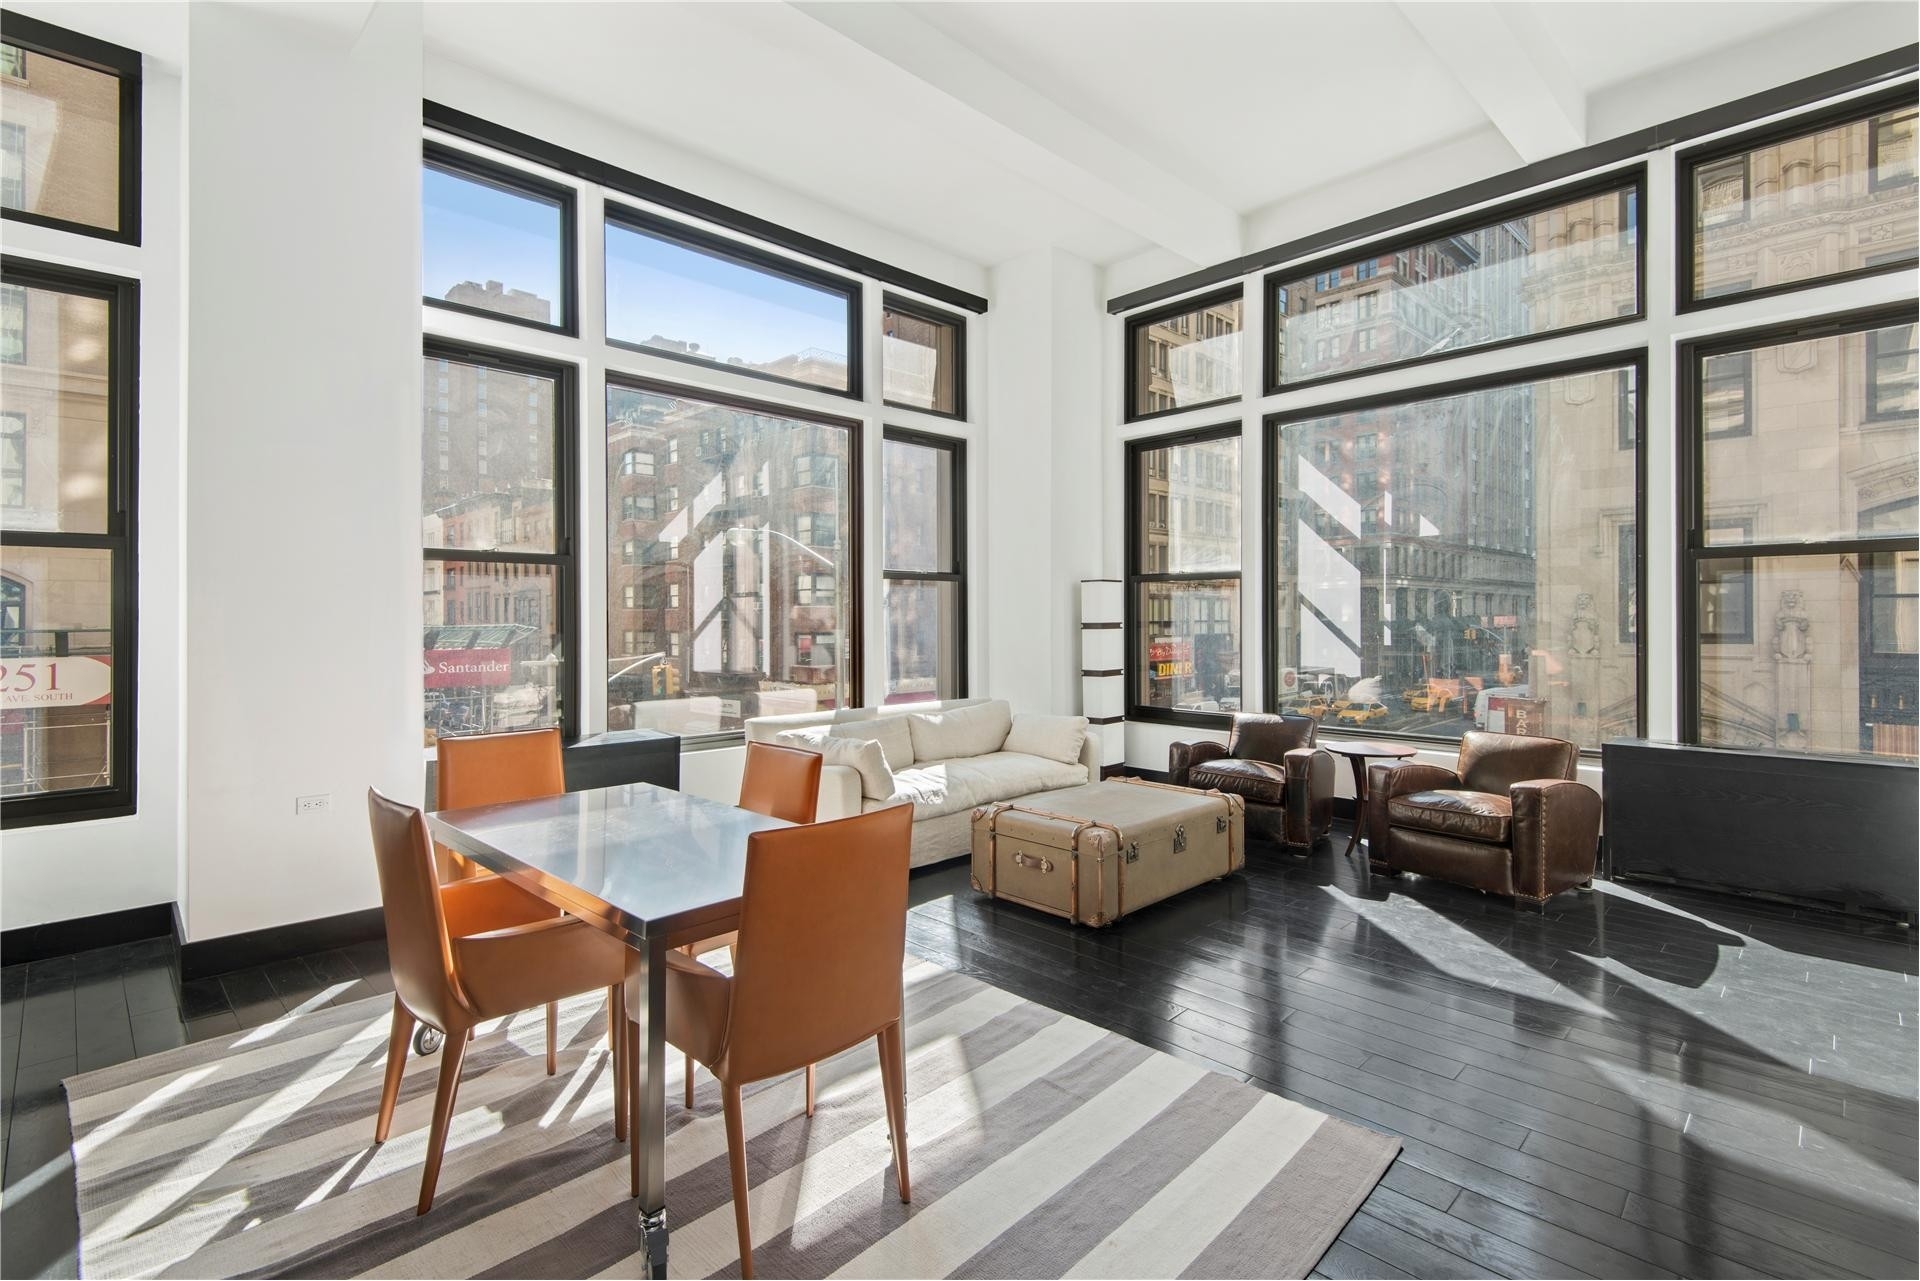 Property at 254 Park Avenue South, 3D New York